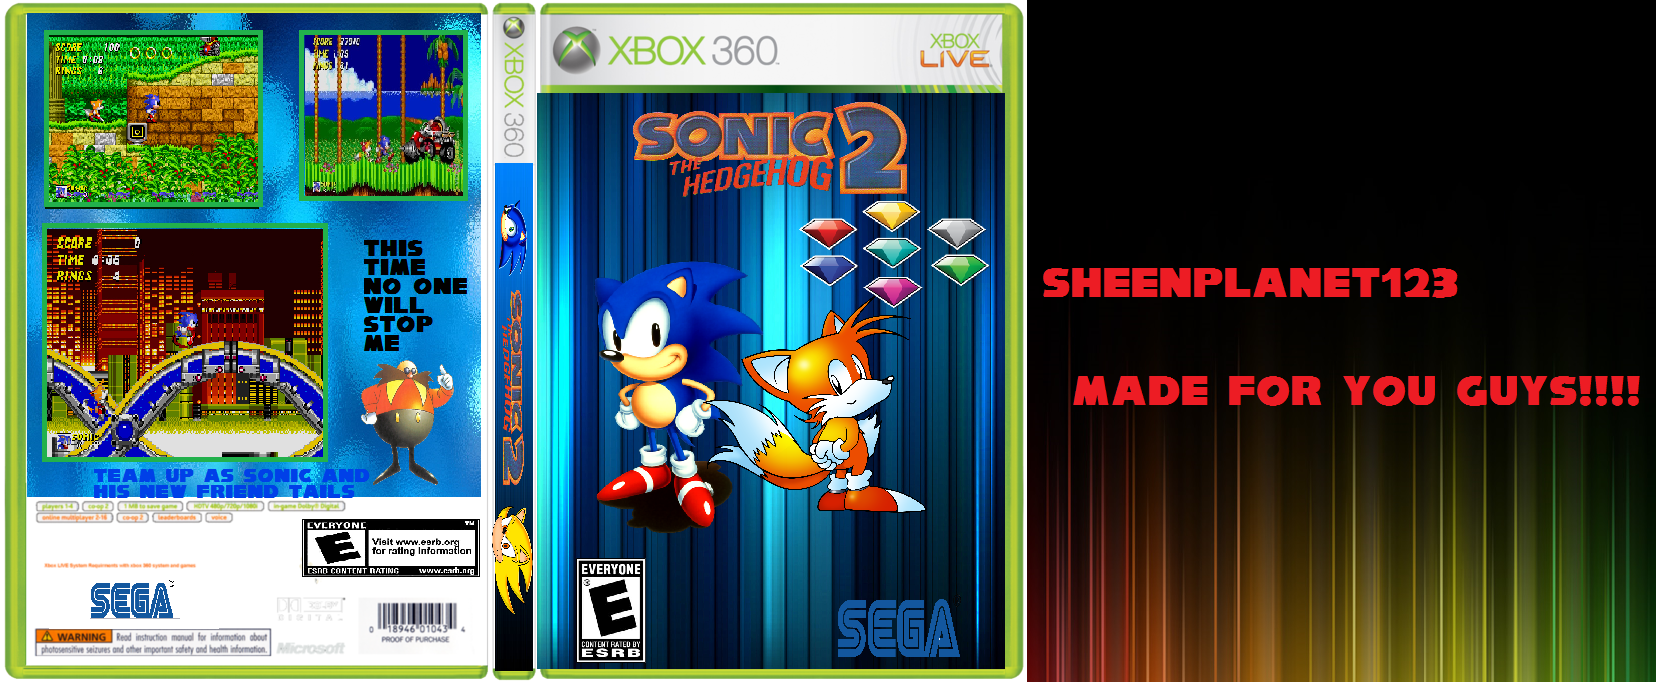 Sonic 2 remake box cover